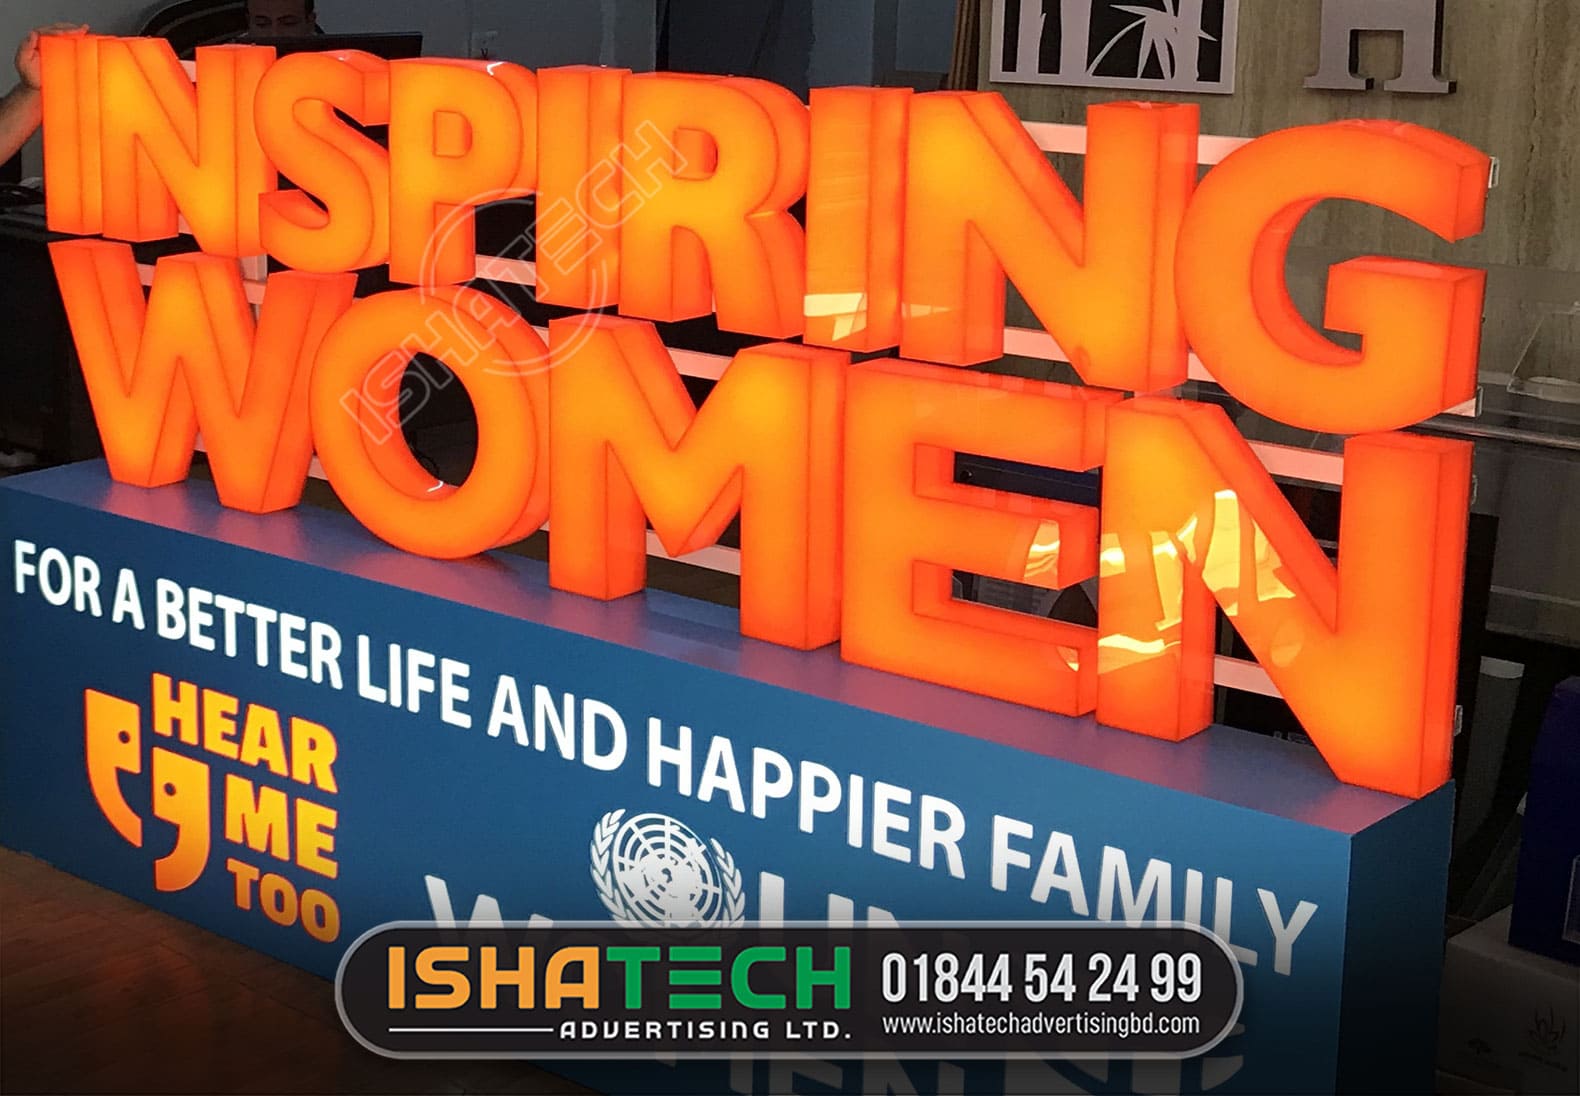 INSPIRING WOMEN ORANGE COLOR LED LETTER SIGNS CREATE BY ISHATECH ADVERTISING LTD